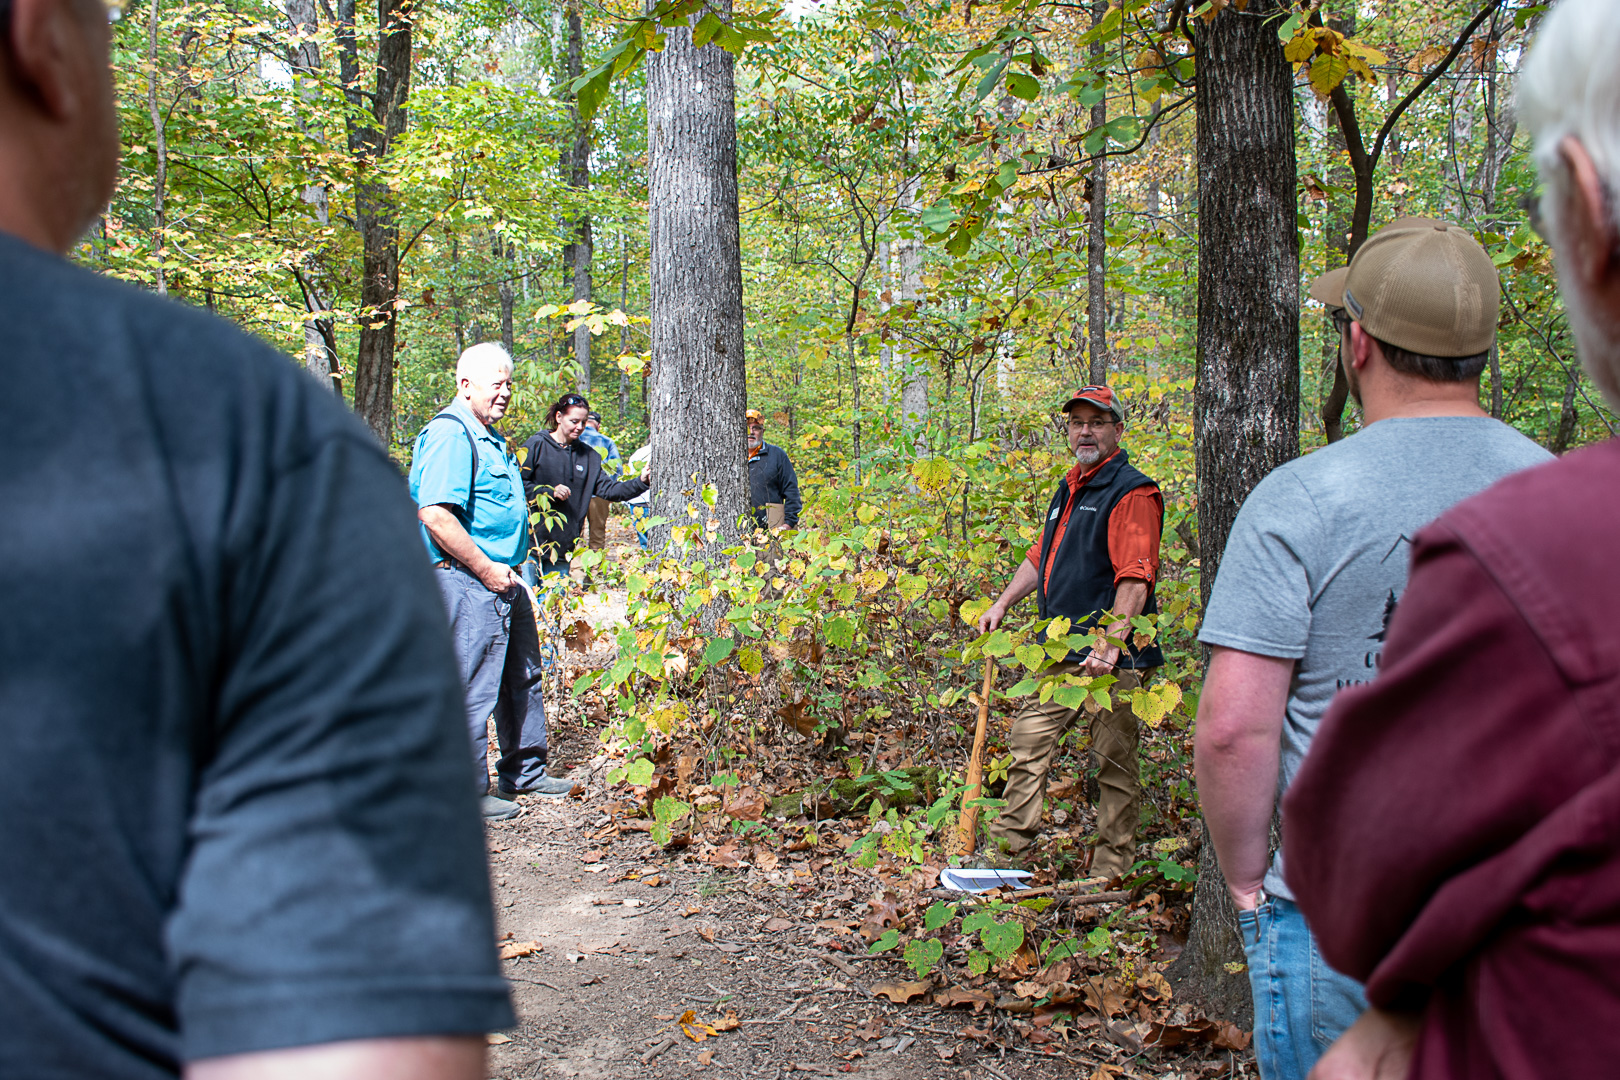 Man talks in a wooded area to group of people.